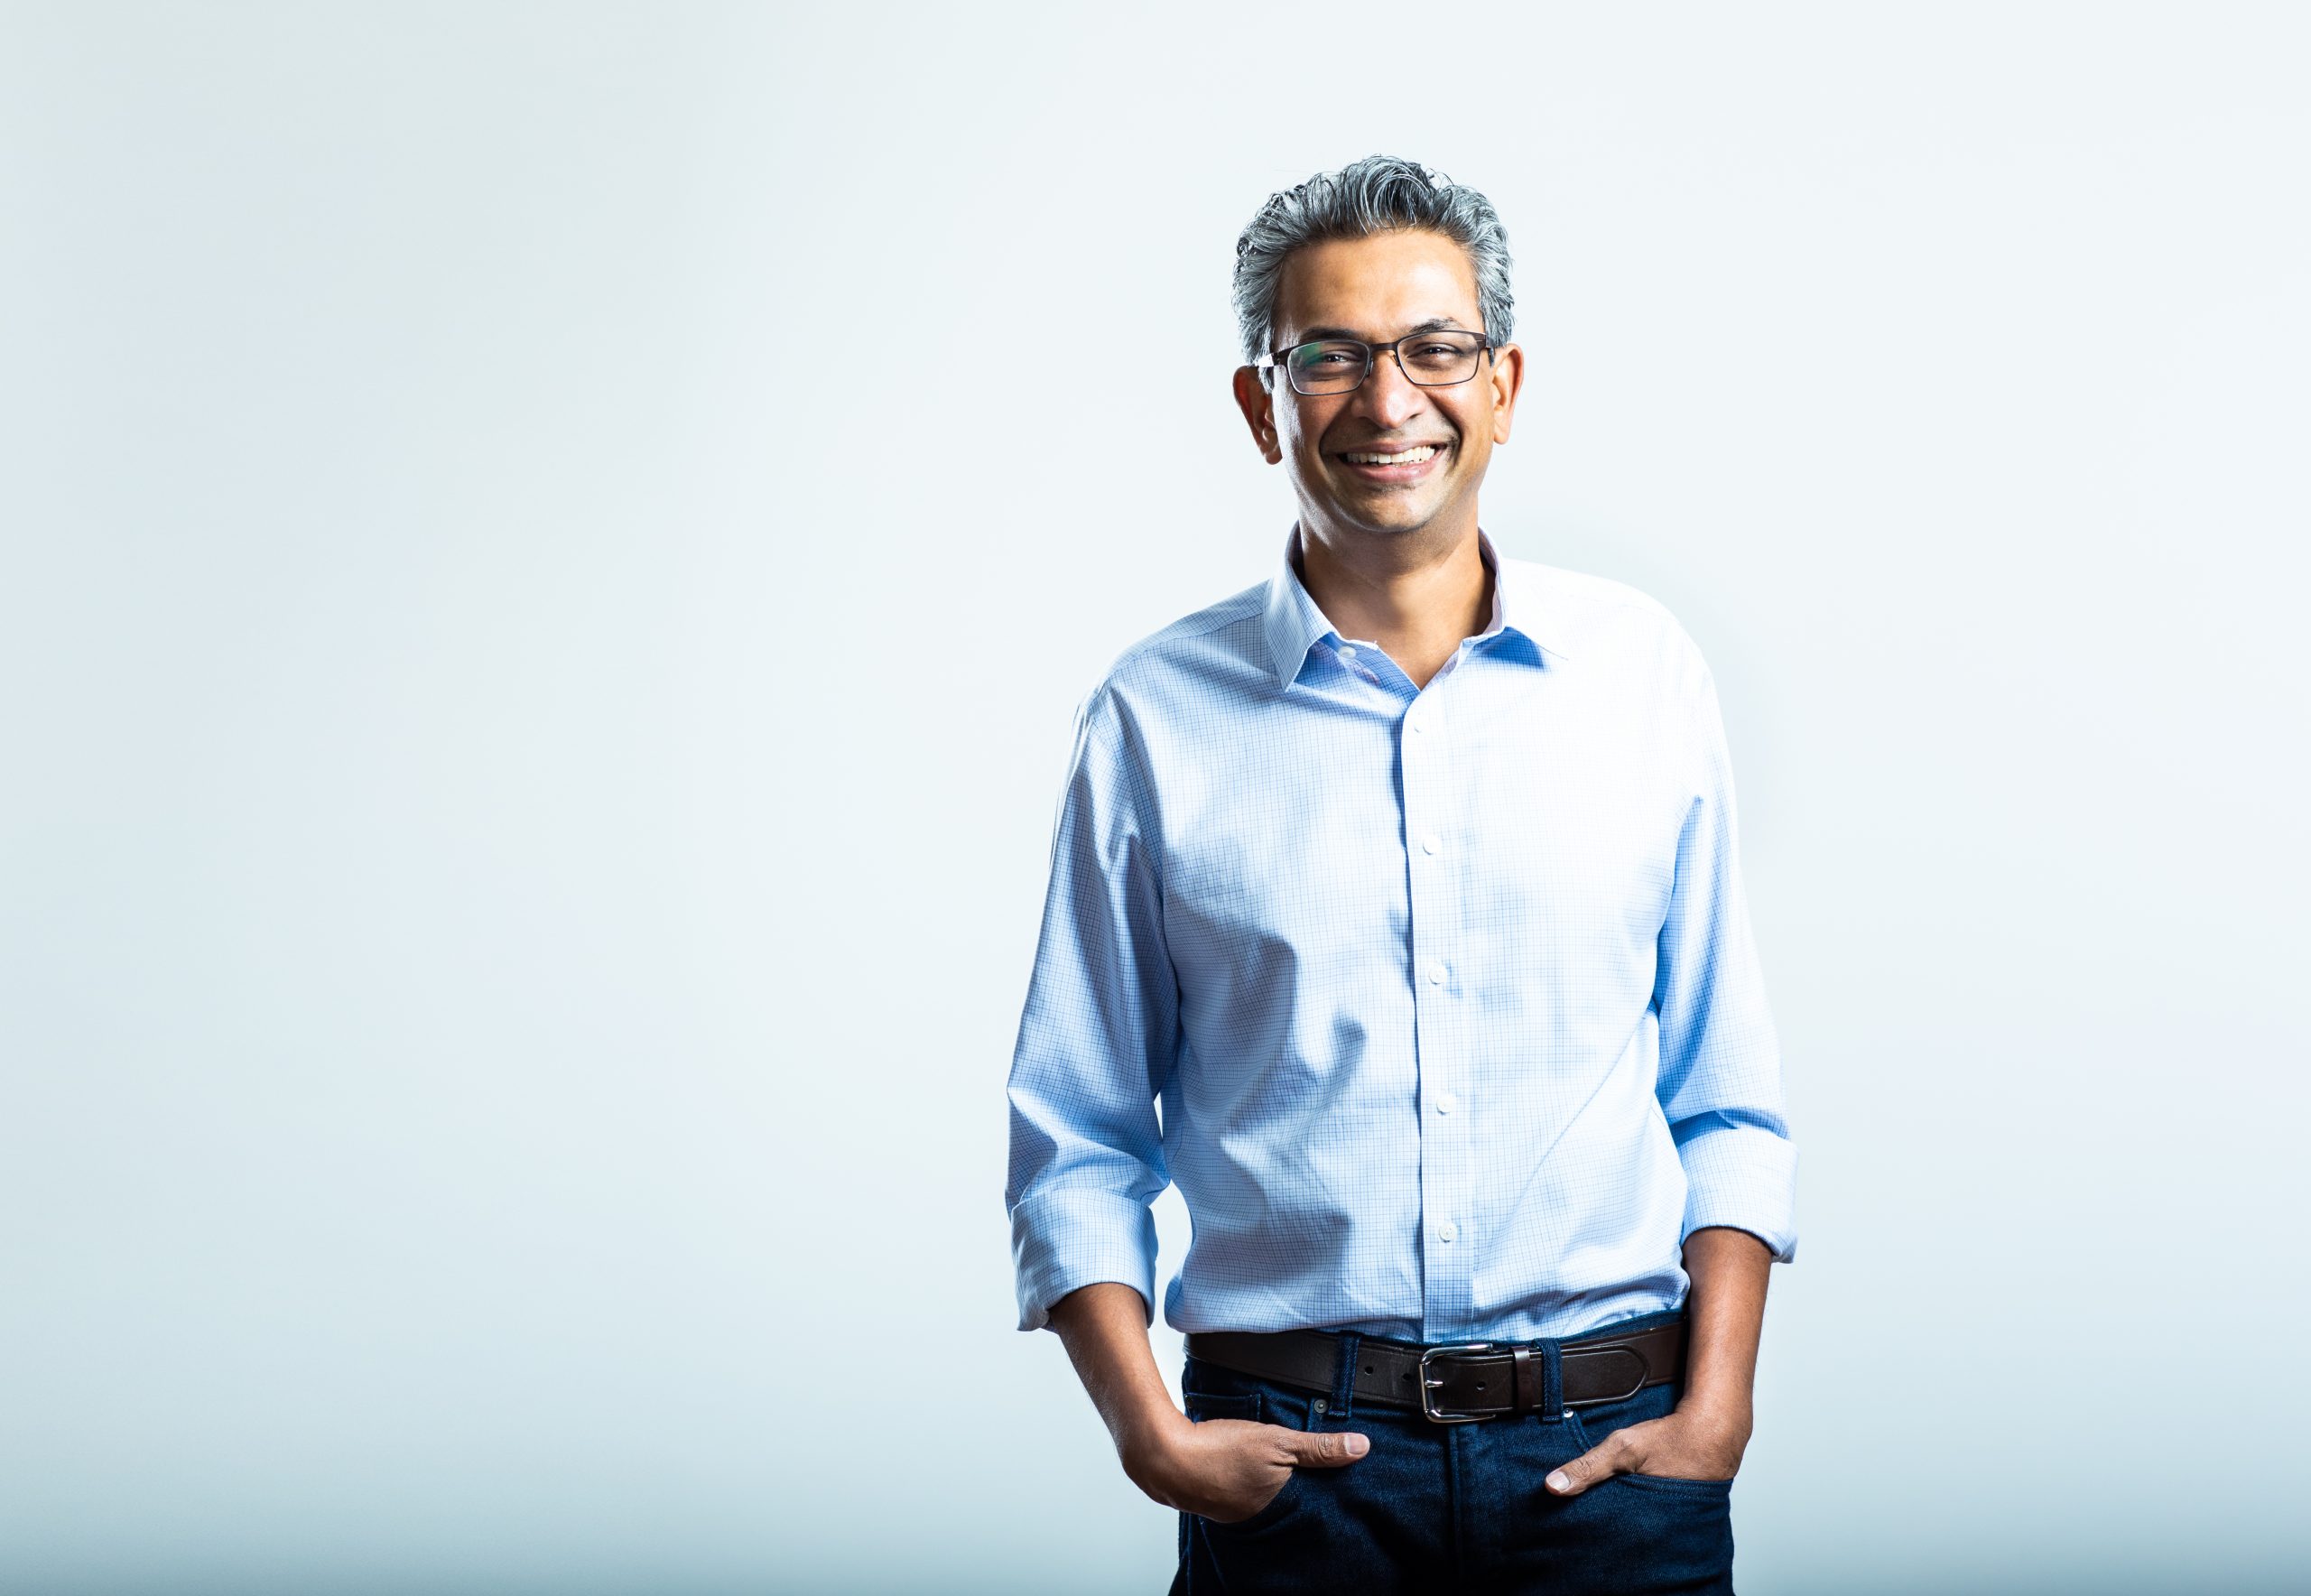 Startups that survive COVID-19 will come out stronger than ever: Q&A with Surge’s Rajan Anandan